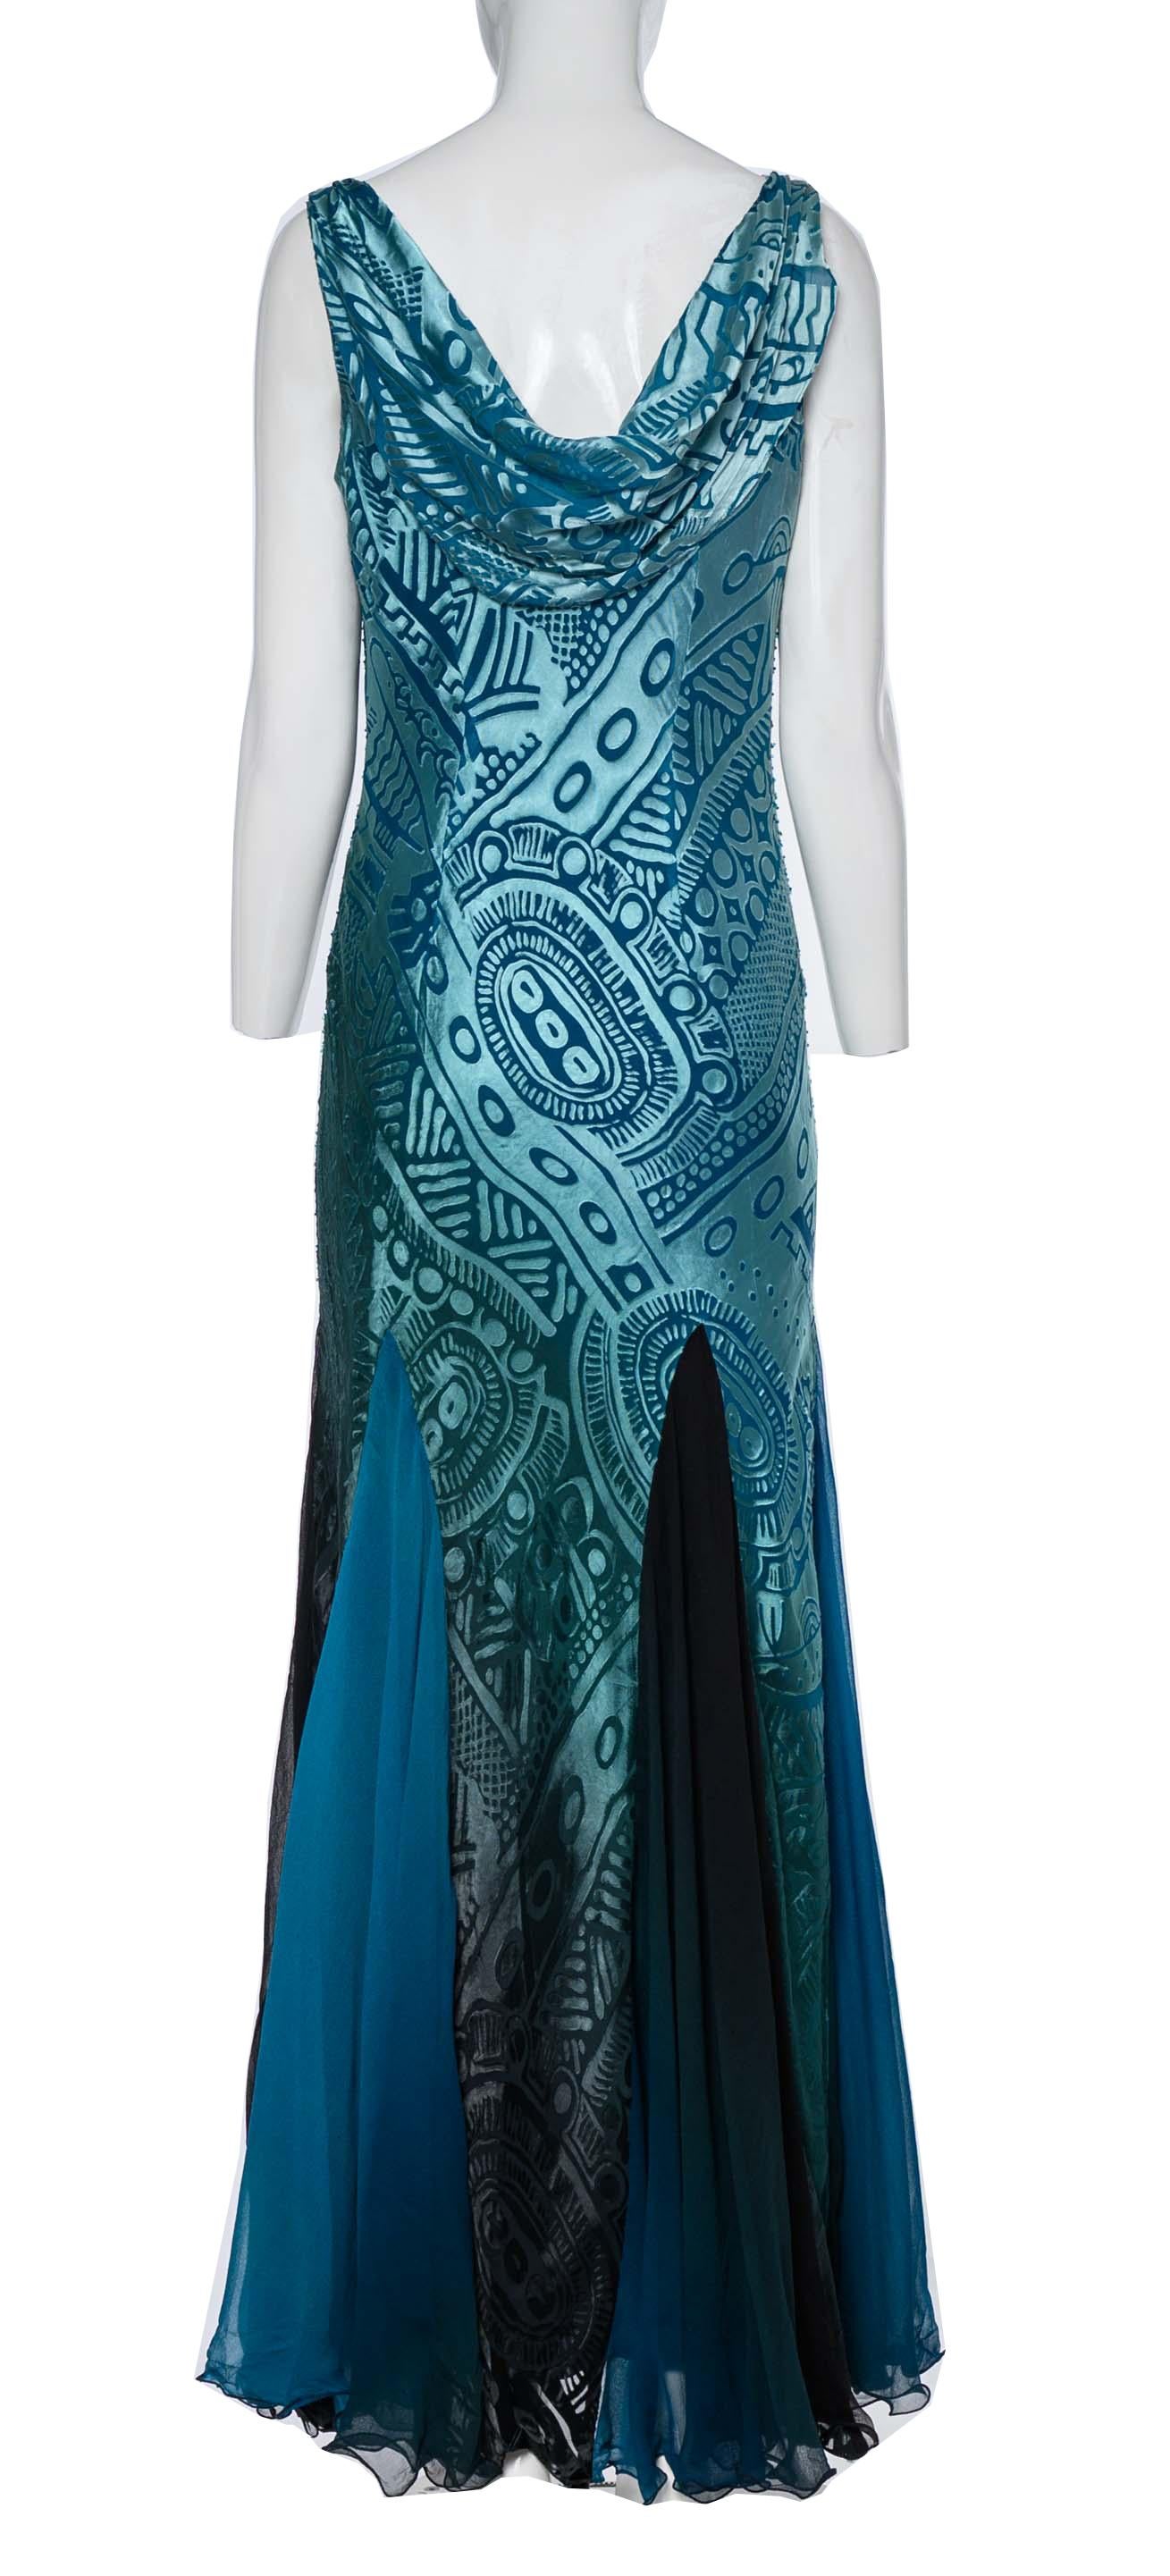 The Diane Freis Burnout Effect Sequinned Dress is a mesmerizing and glamorous piece. Designed with a cowl neck, it creates a beautifully draped collar and back, exuding an air of elegance and sophistication. The dress features a luxurious turquoise